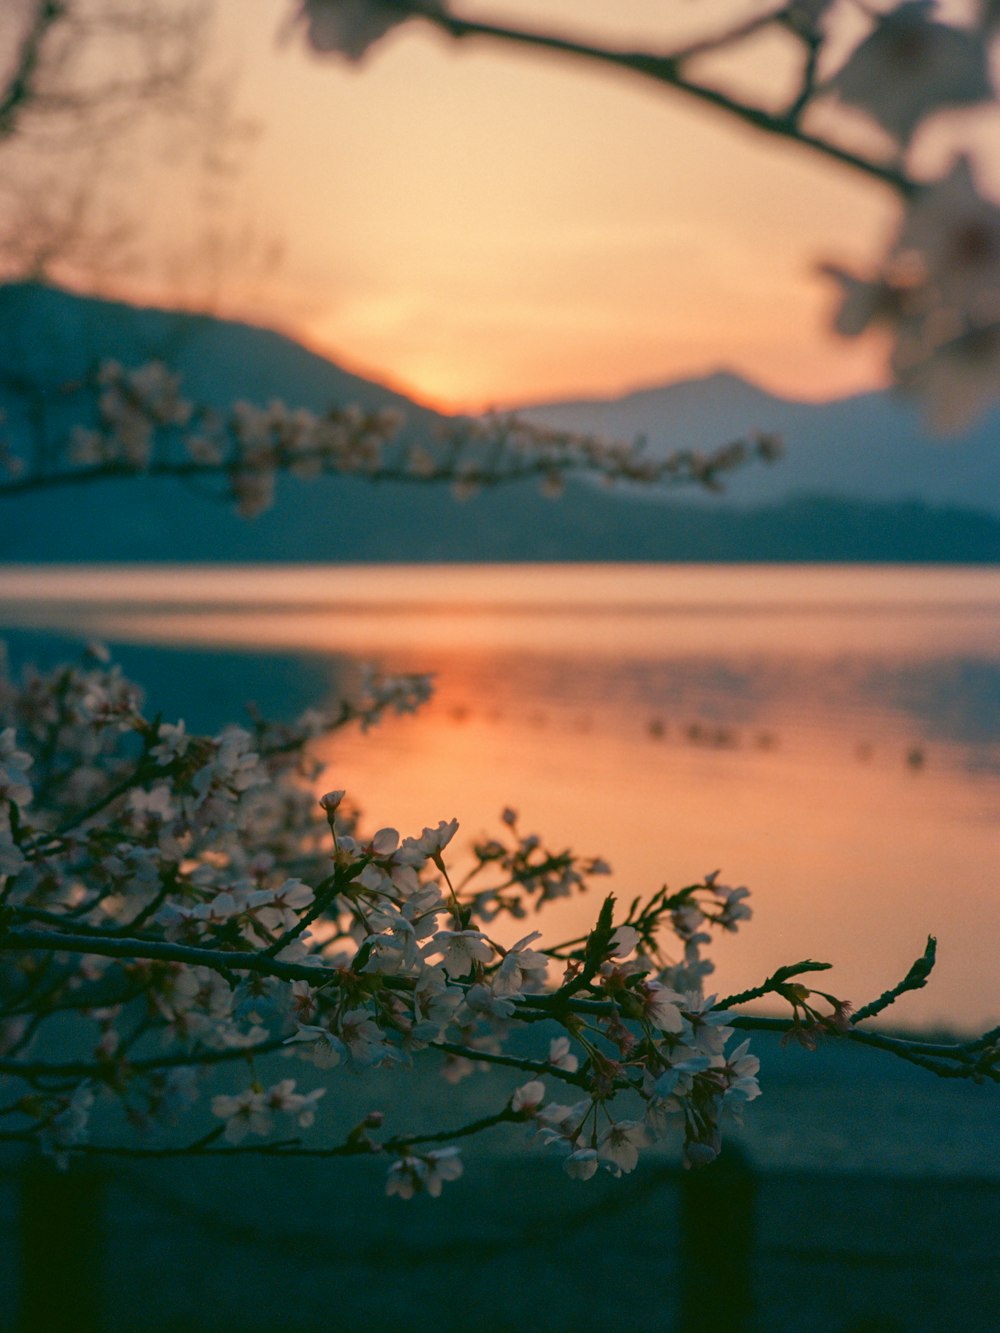 a tree branch with white flowers in front of a body of water